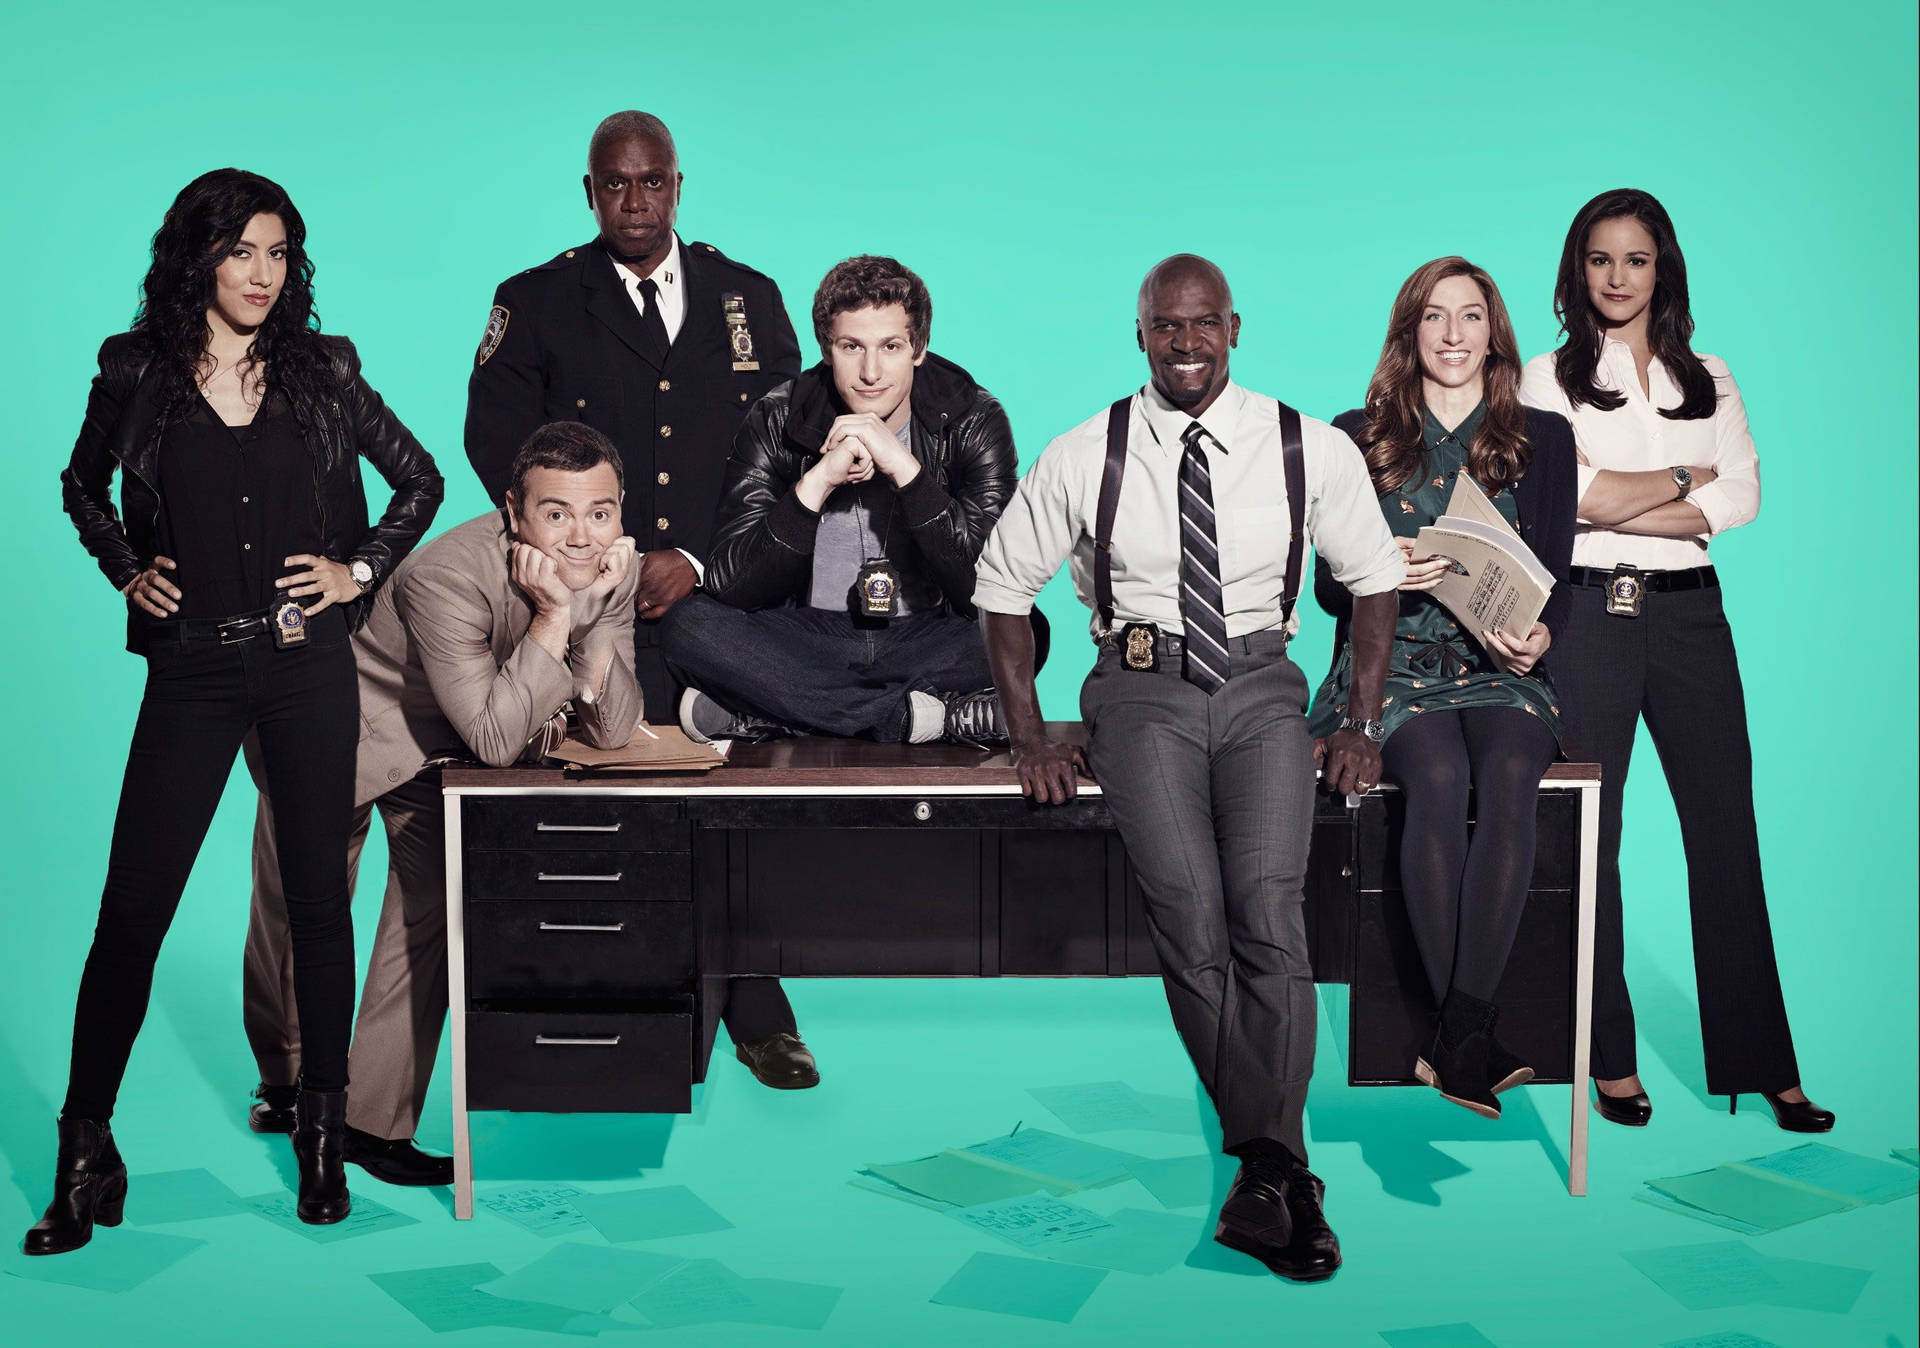 "Welcome to the 98th precinct, home of the beloved Brooklyn Nine Nine crew" Wallpaper